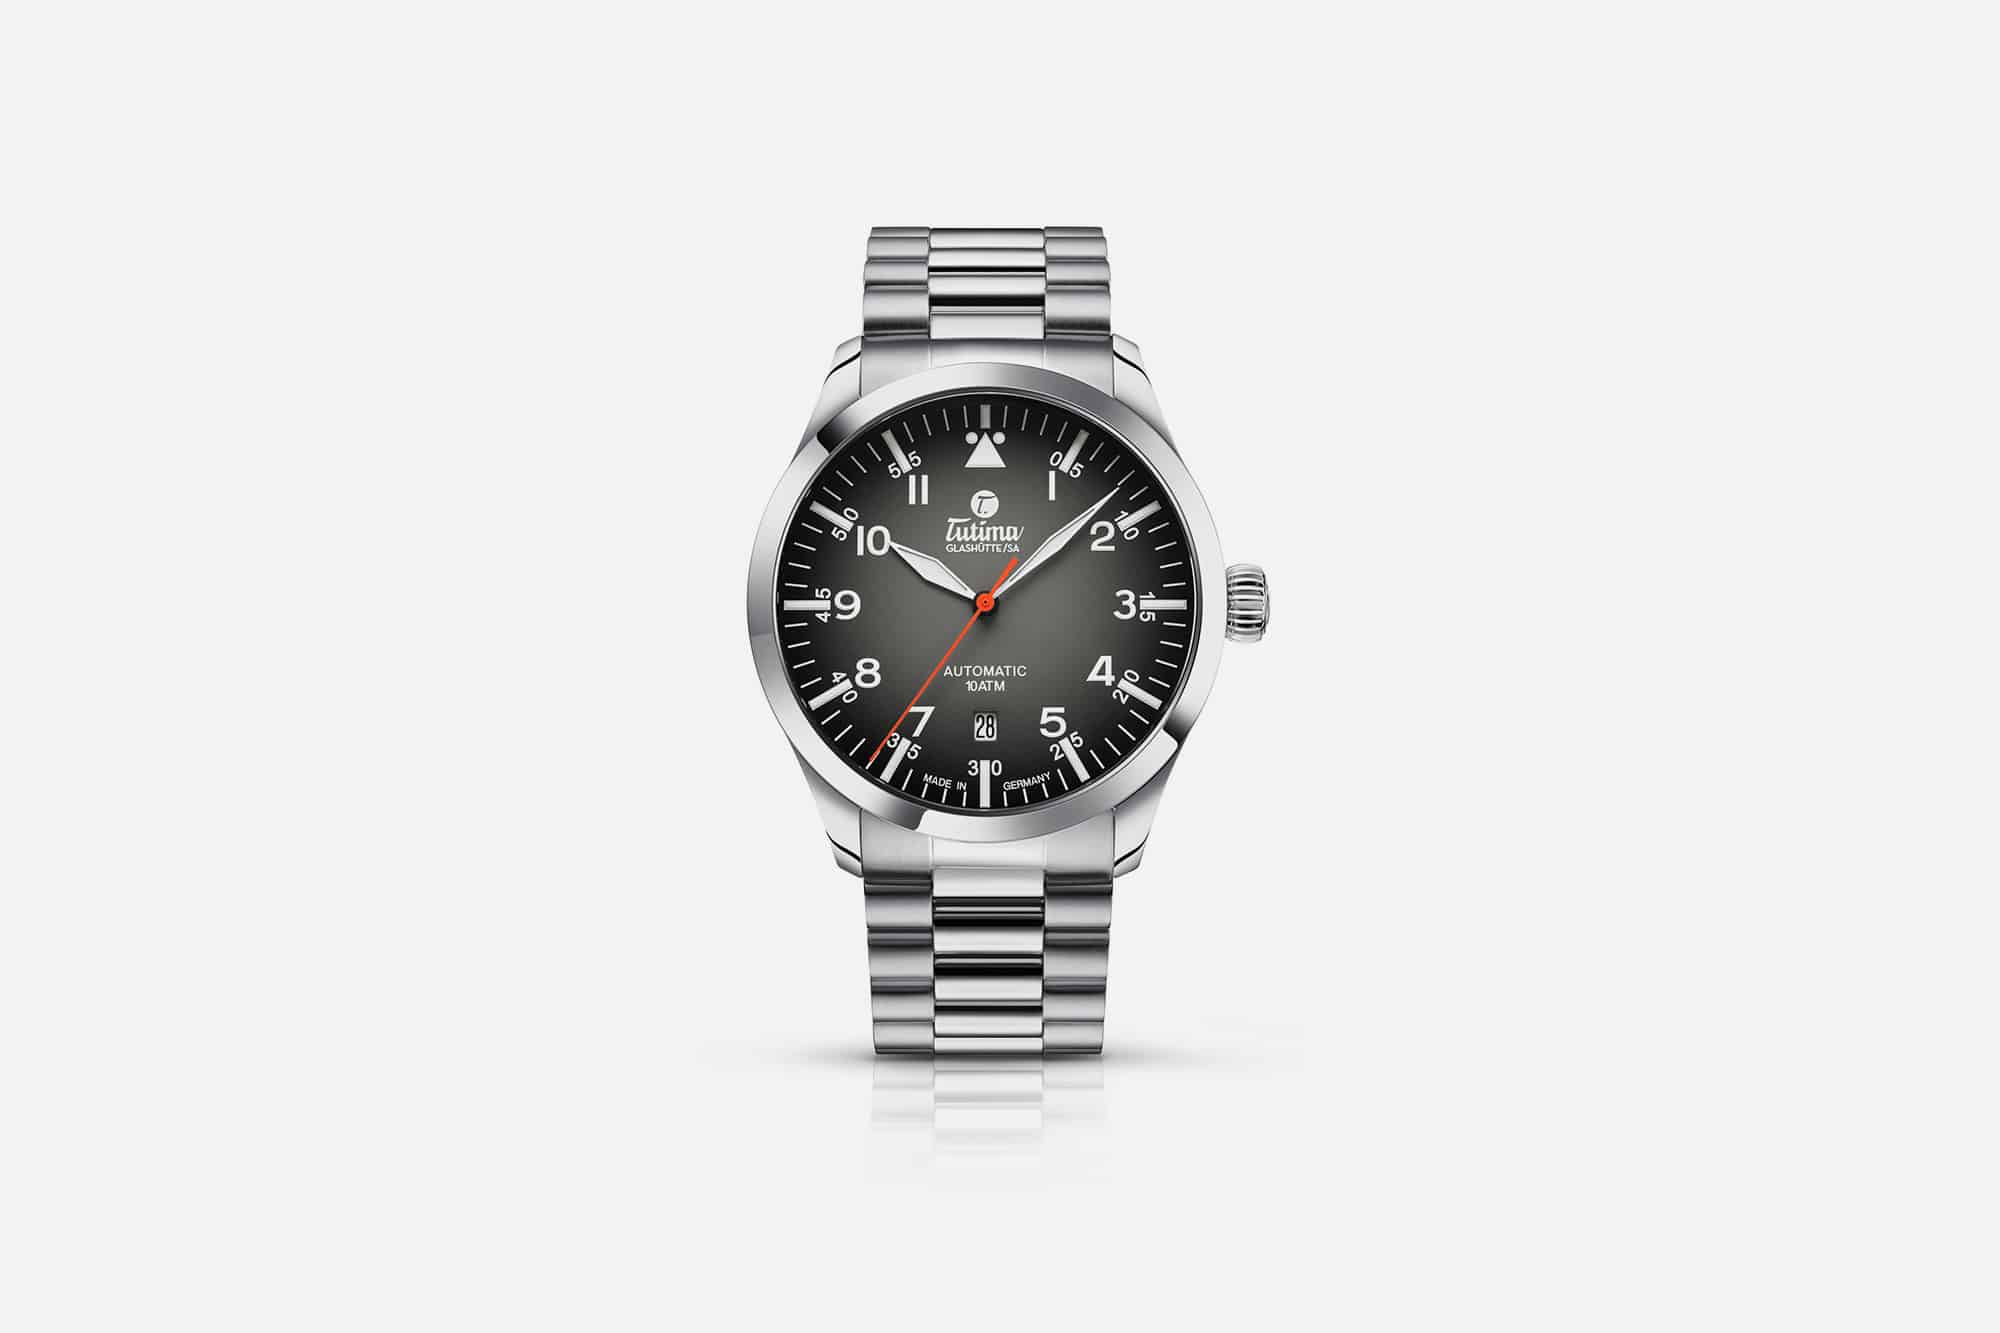 Introducing the Tutima Flieger in Slate Grey